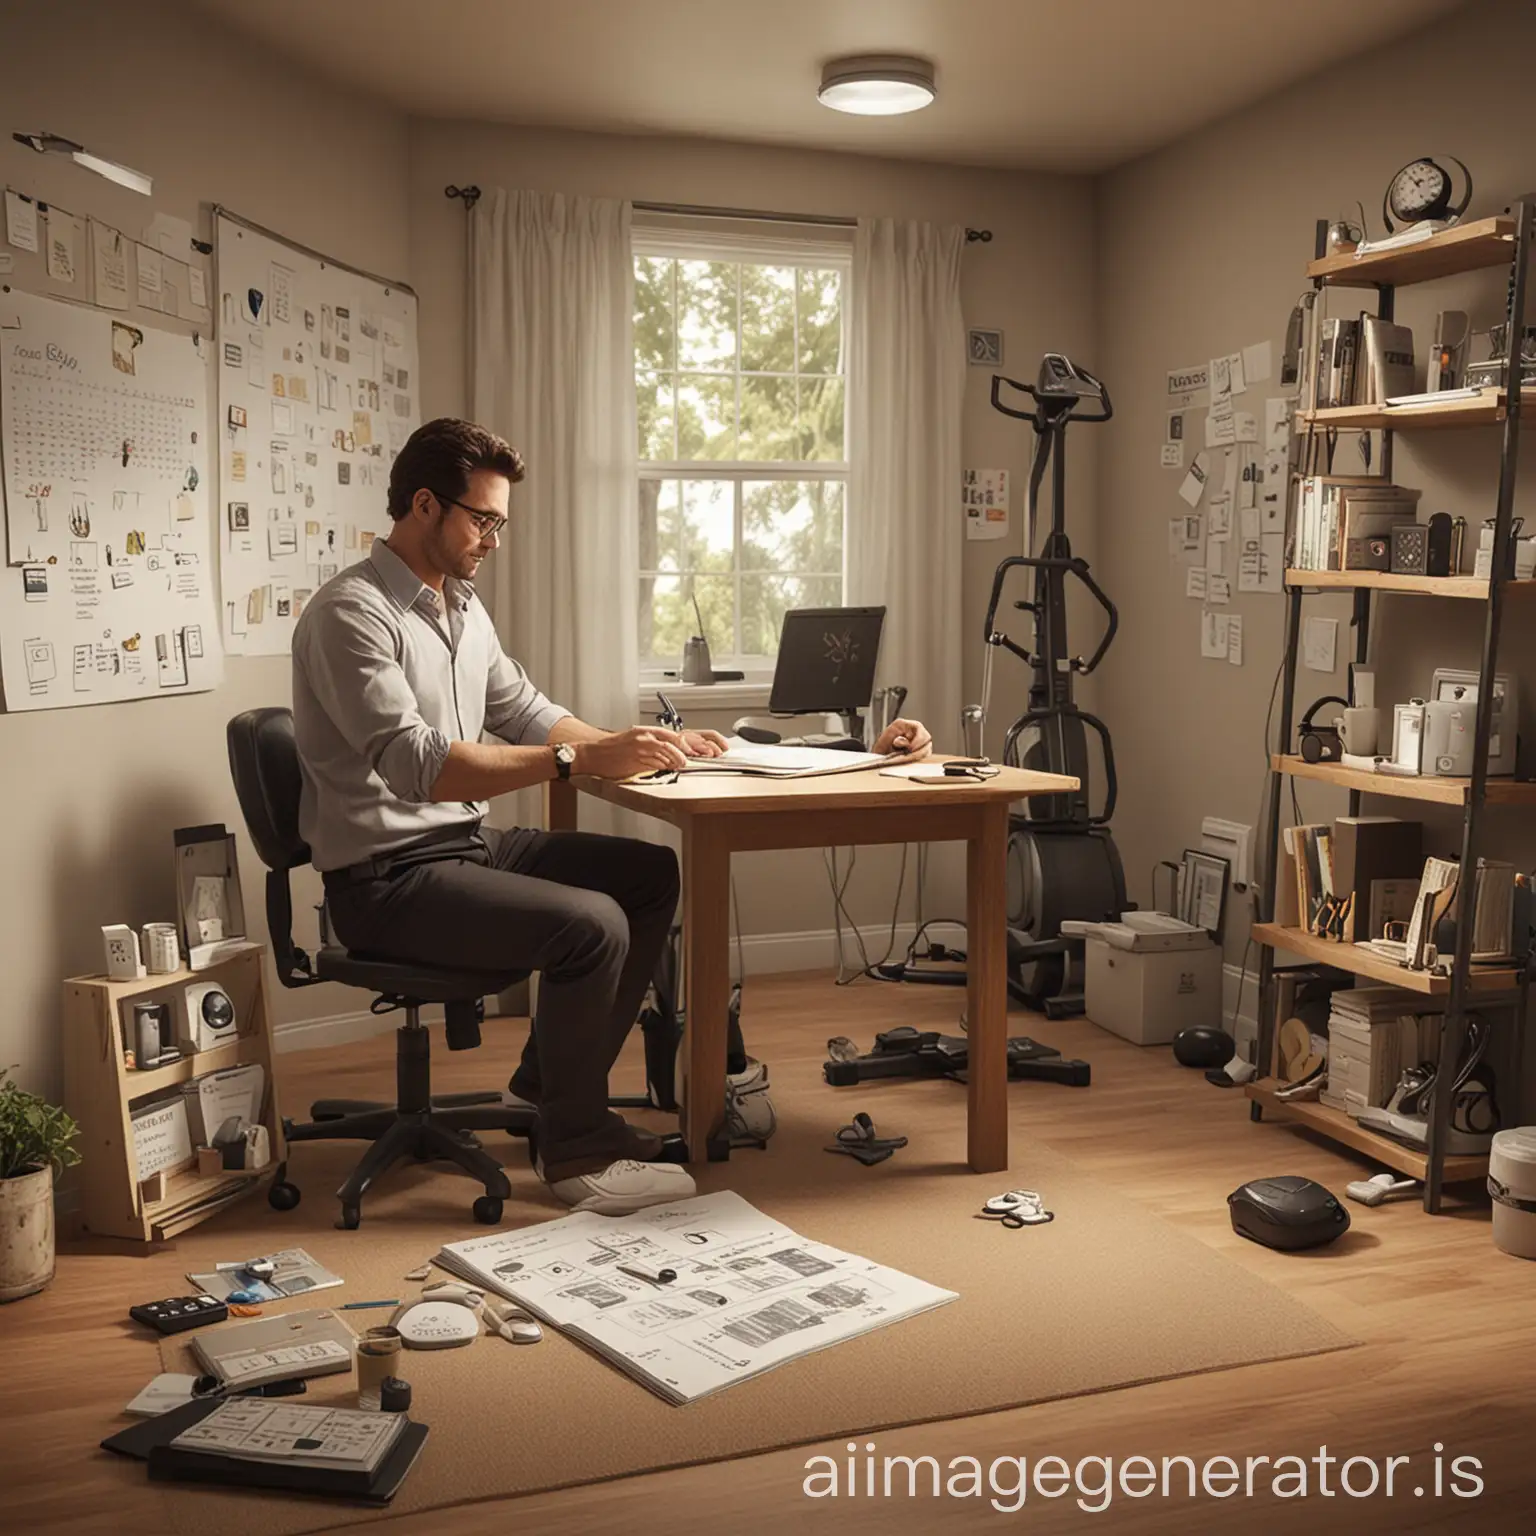 Depict a man in his daily environment actively engaging in creating effective habits. The setting should be a modern, organized home or office, with the man surrounded by realistic symbols of his routines, such as exercise equipment, books, and a planner. Use natural lighting and detailed progress indicators to emphasize the commitment and consistency required for habit formation. Include personal touches and realistic elements to enhance the relatability and realism of the scene.